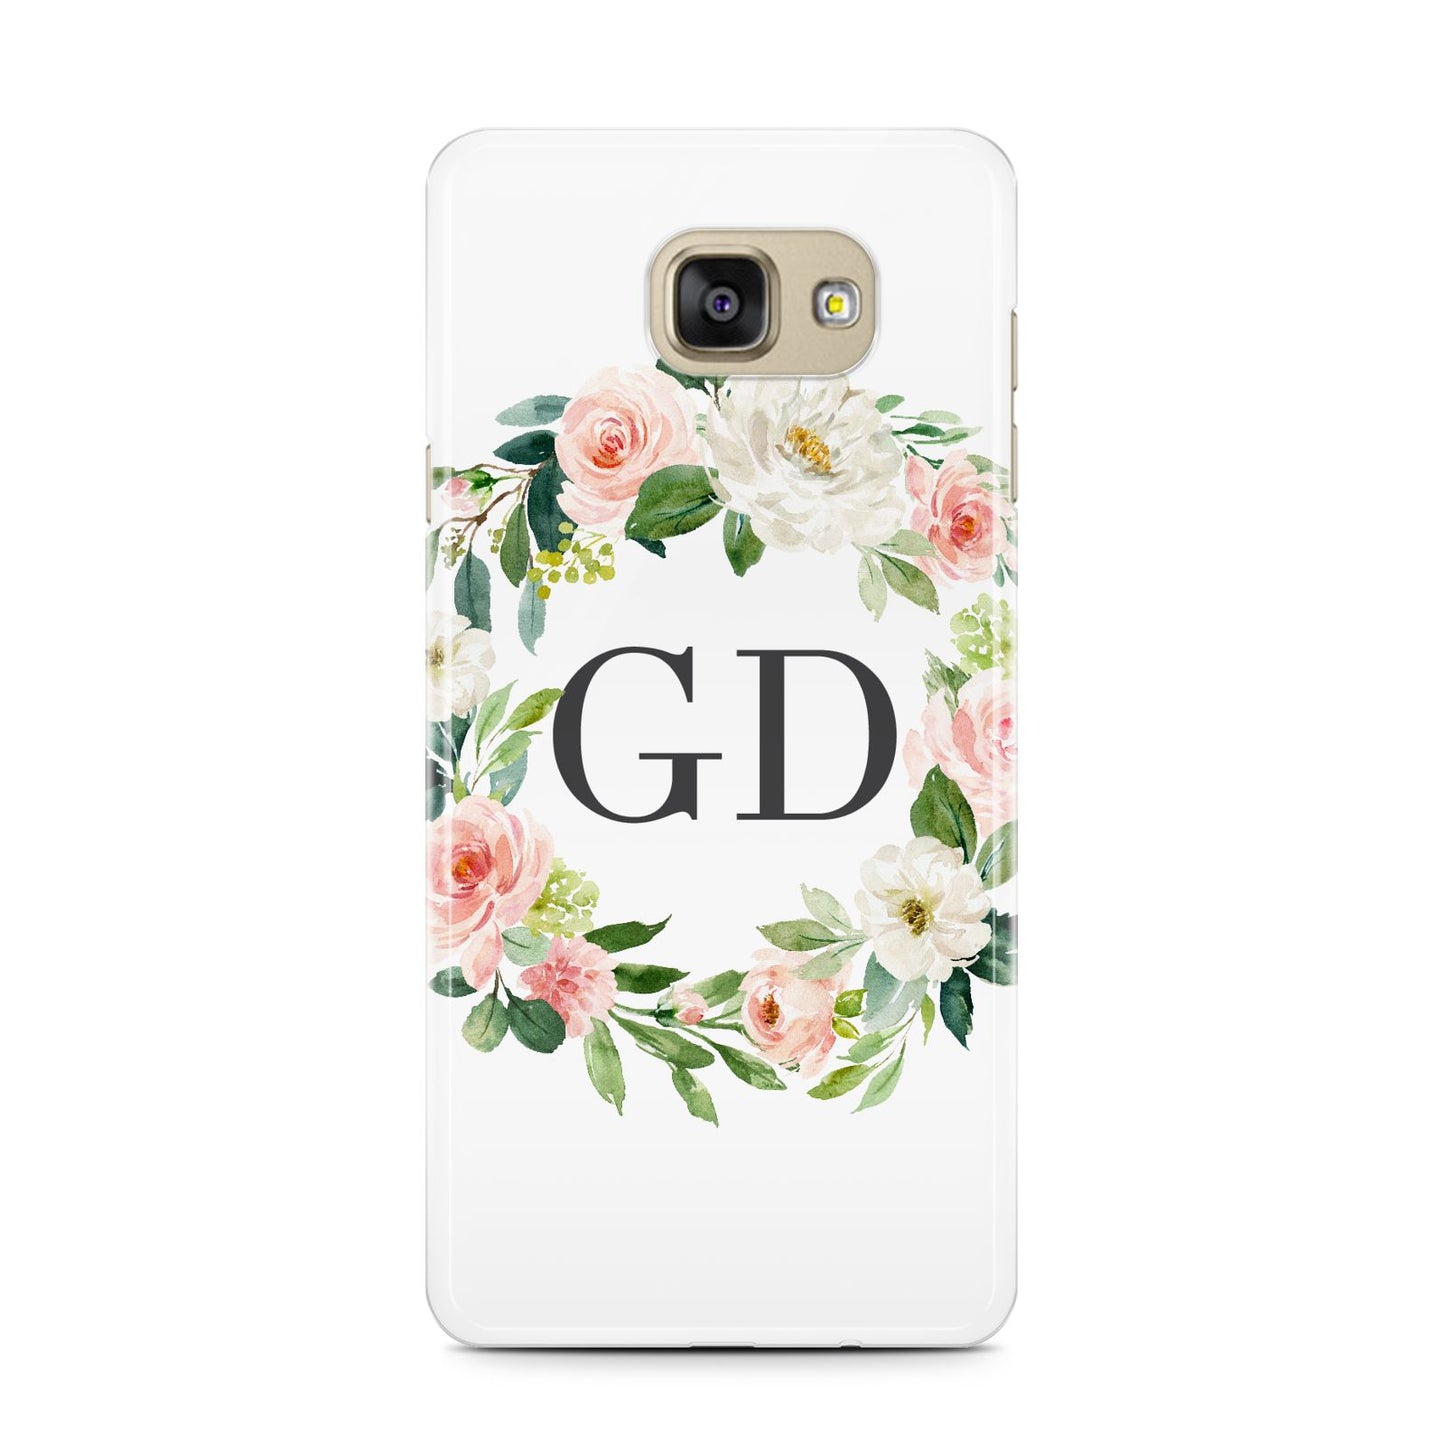 Personalised floral wreath Samsung Galaxy A7 2016 Case on gold phone